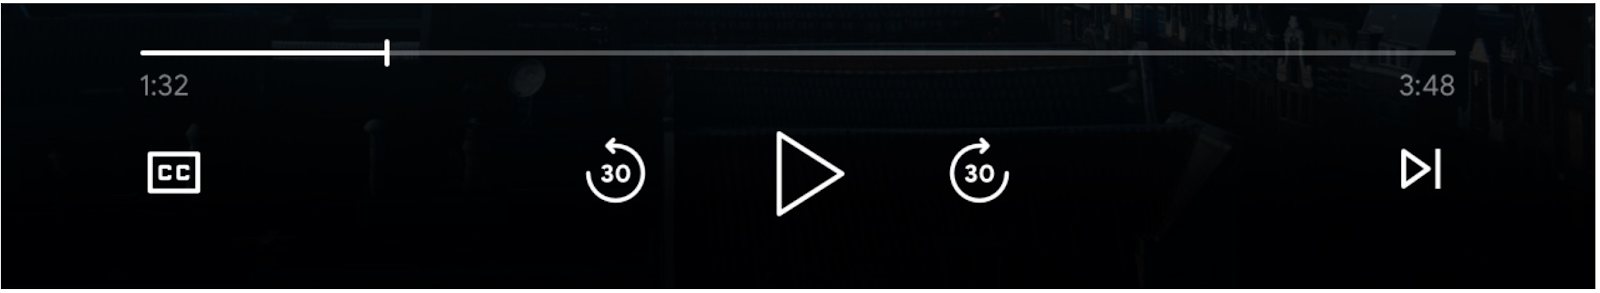 Image of media player controls: progress bar, 'Play' button, 'Skip forward' and 'Skip backward' buttons, 'Queue previous' and 'Queue next' buttons, and 'Closed Caption' buttons enabled